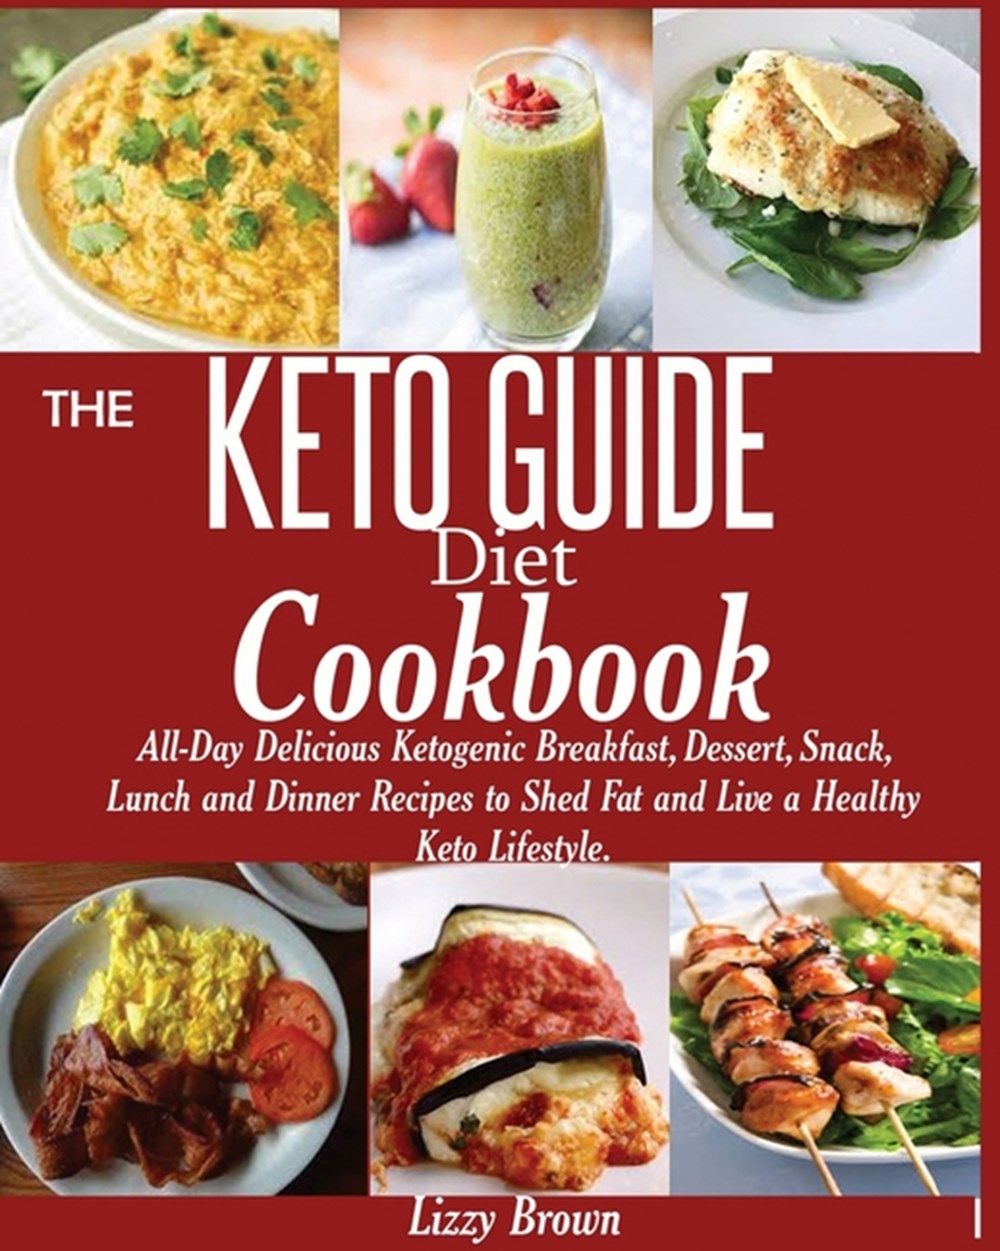 THE KETO GUIDE Diet Cookbook in Paperback by Lizzy Brown